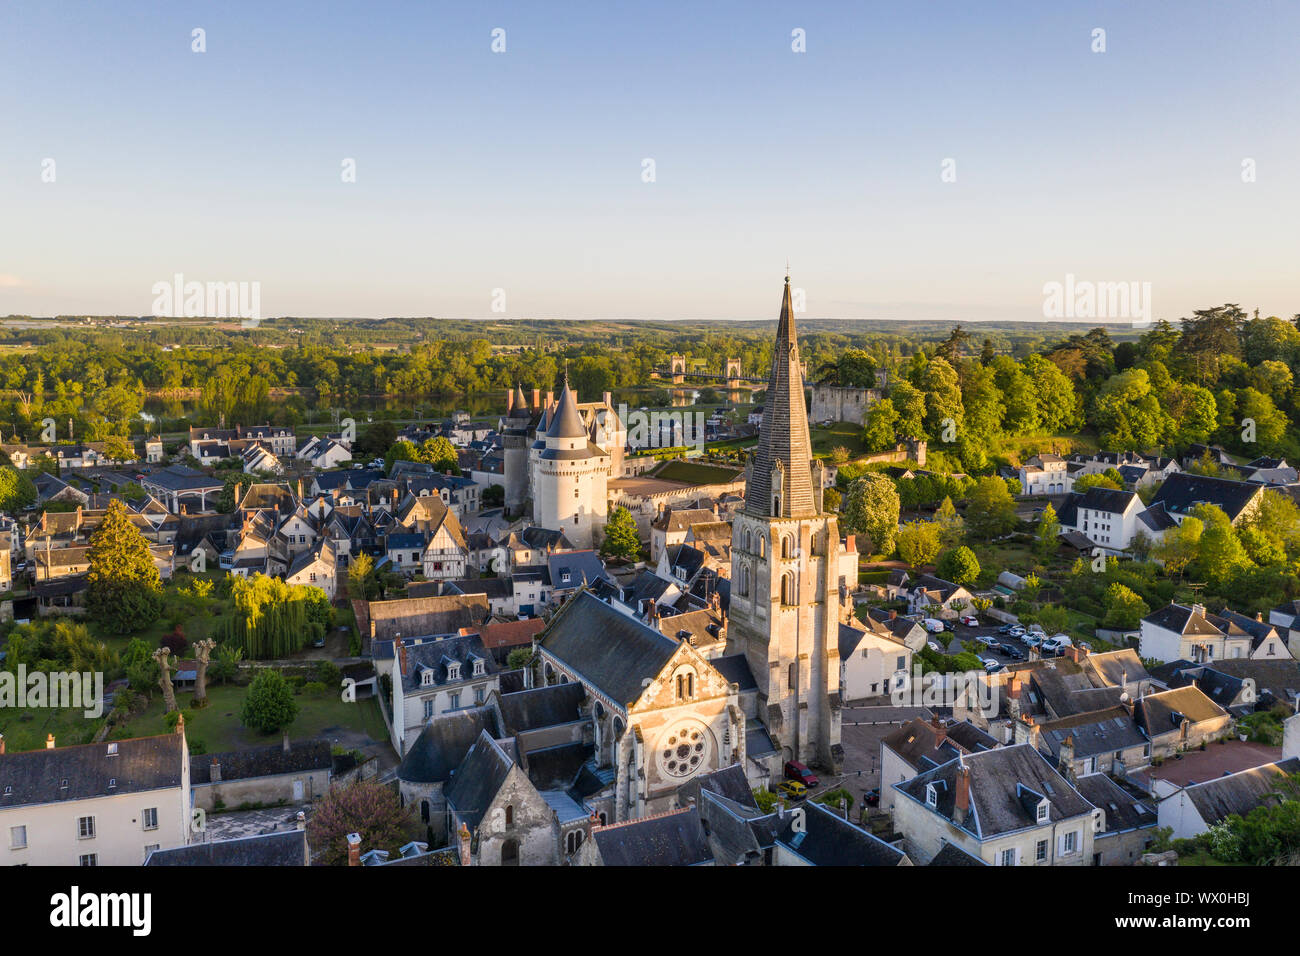 The chateau and town of Langeais in the Loire Valley, Indre et Loire, France, Europe Stock Photo